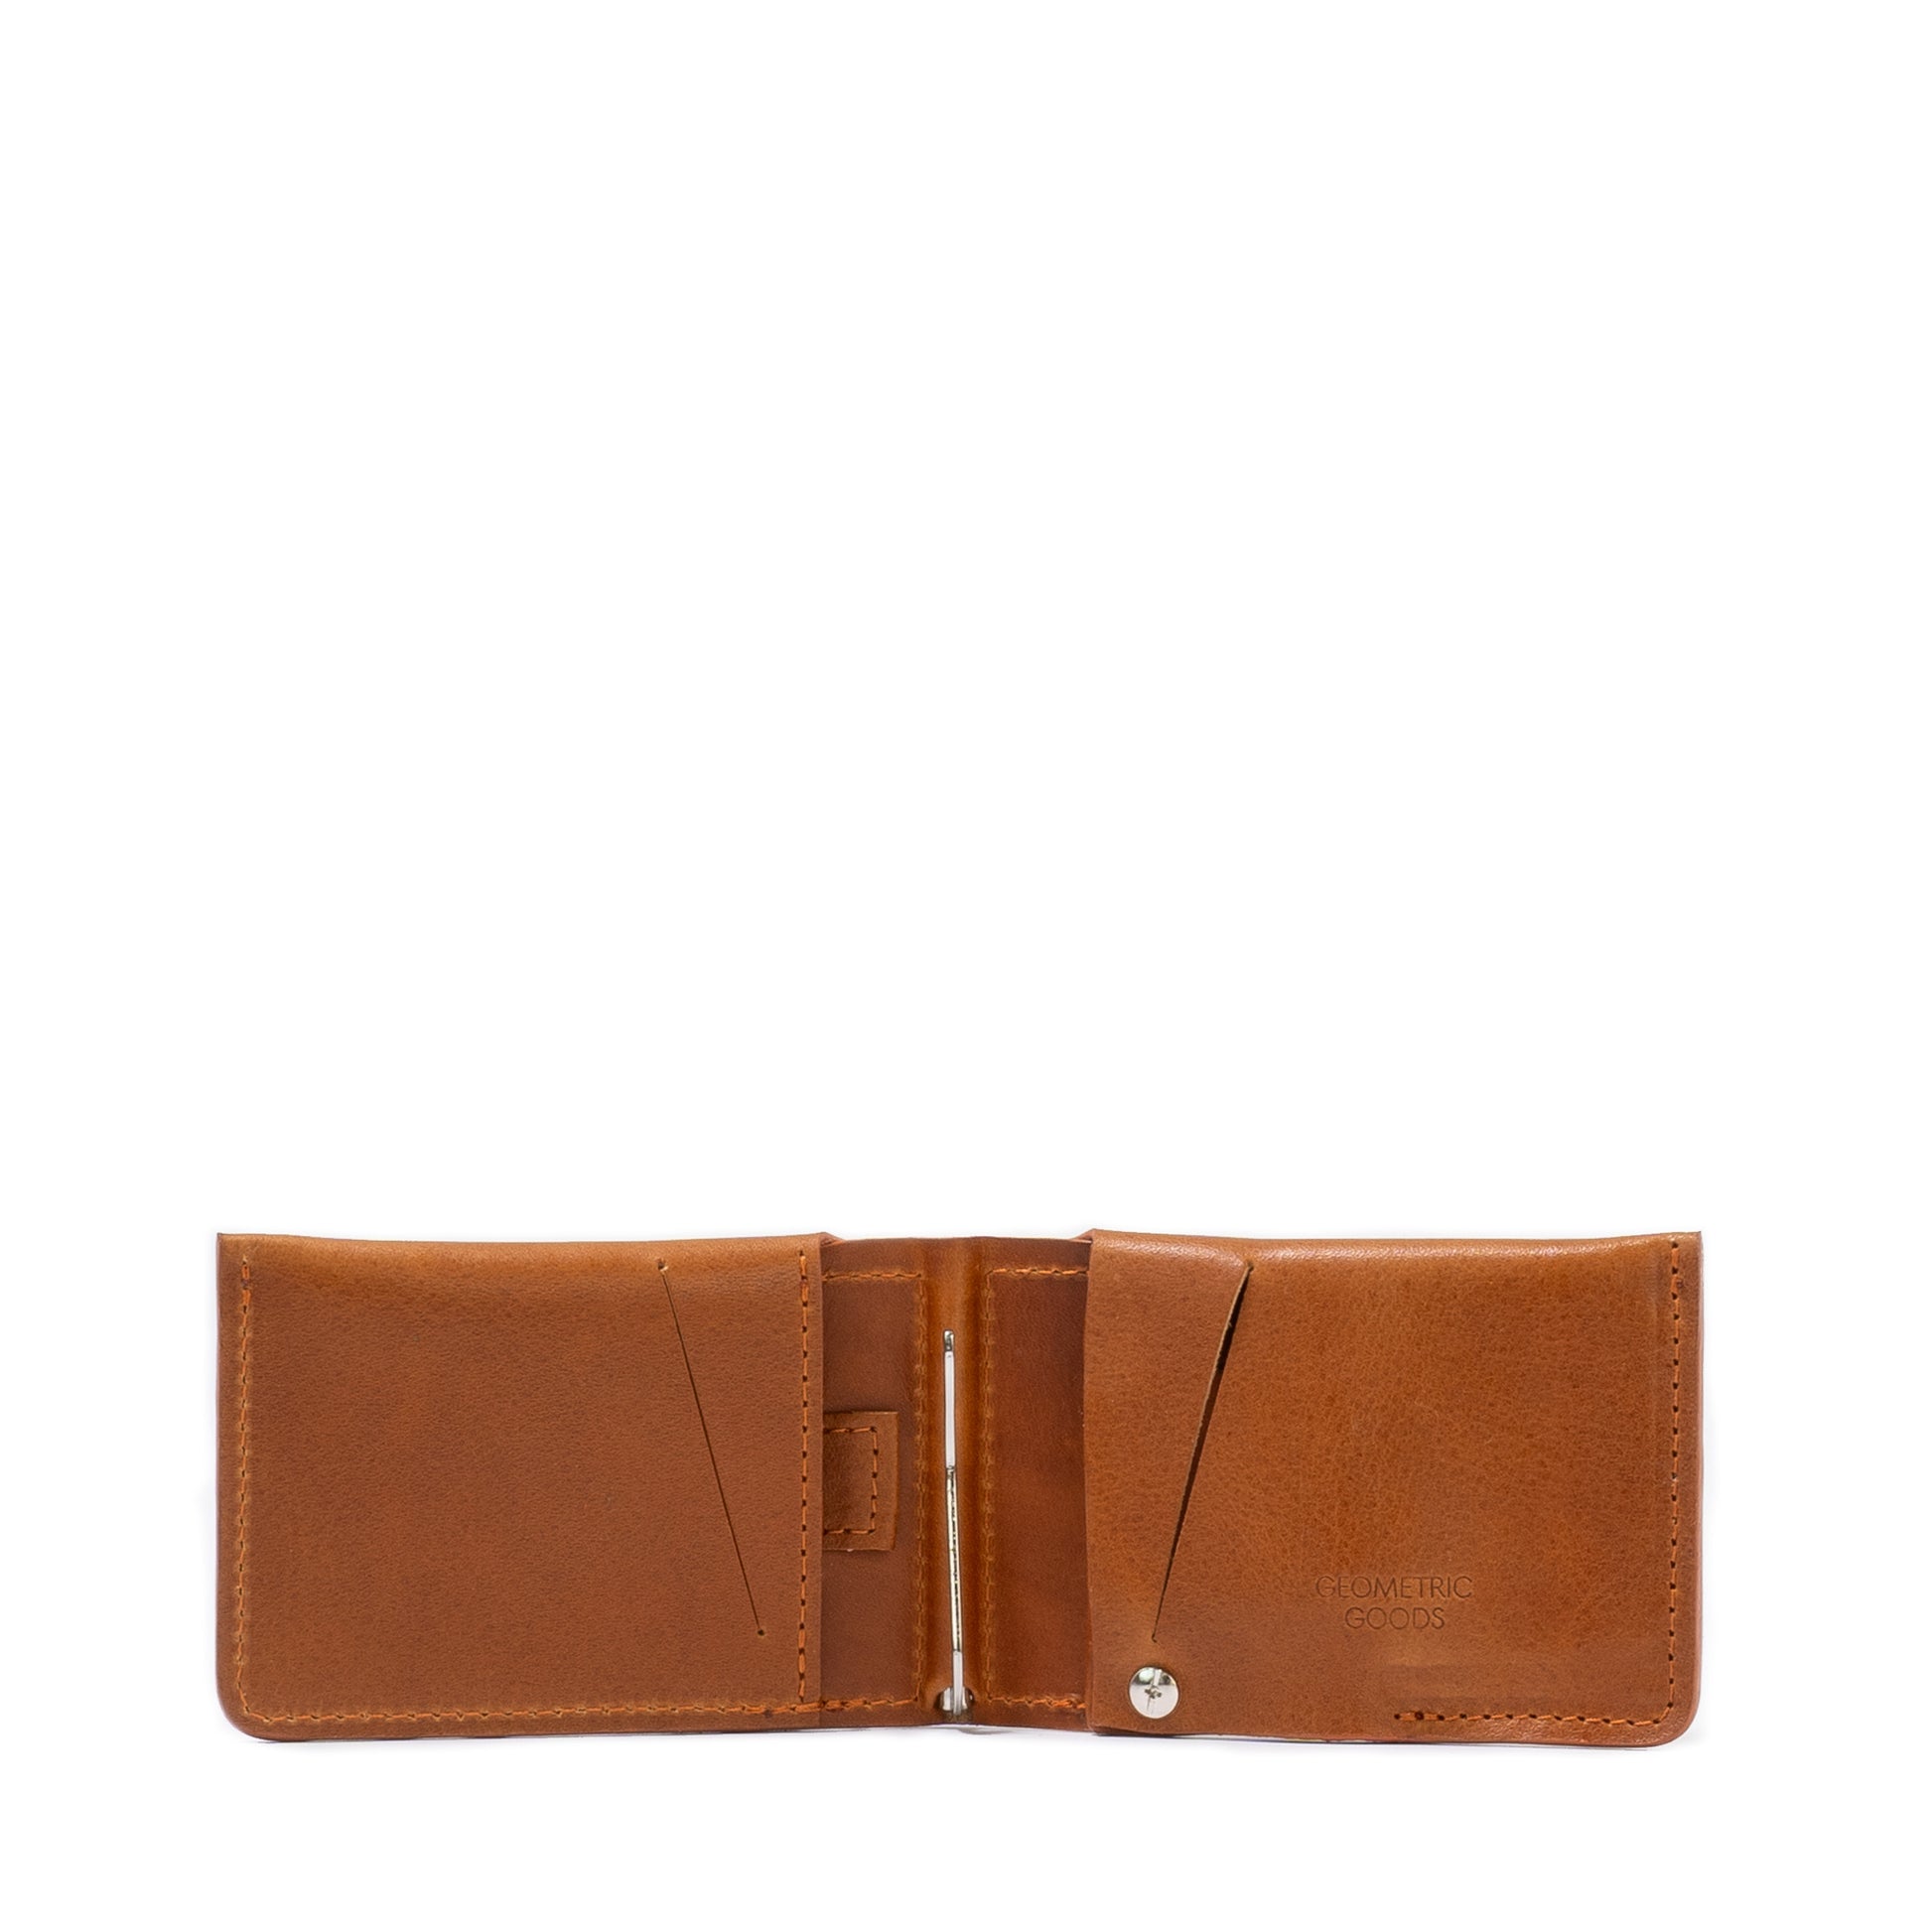 AirTag wallet with money clip in tan (cognac brown) color made by Geometric Goods form premium leather